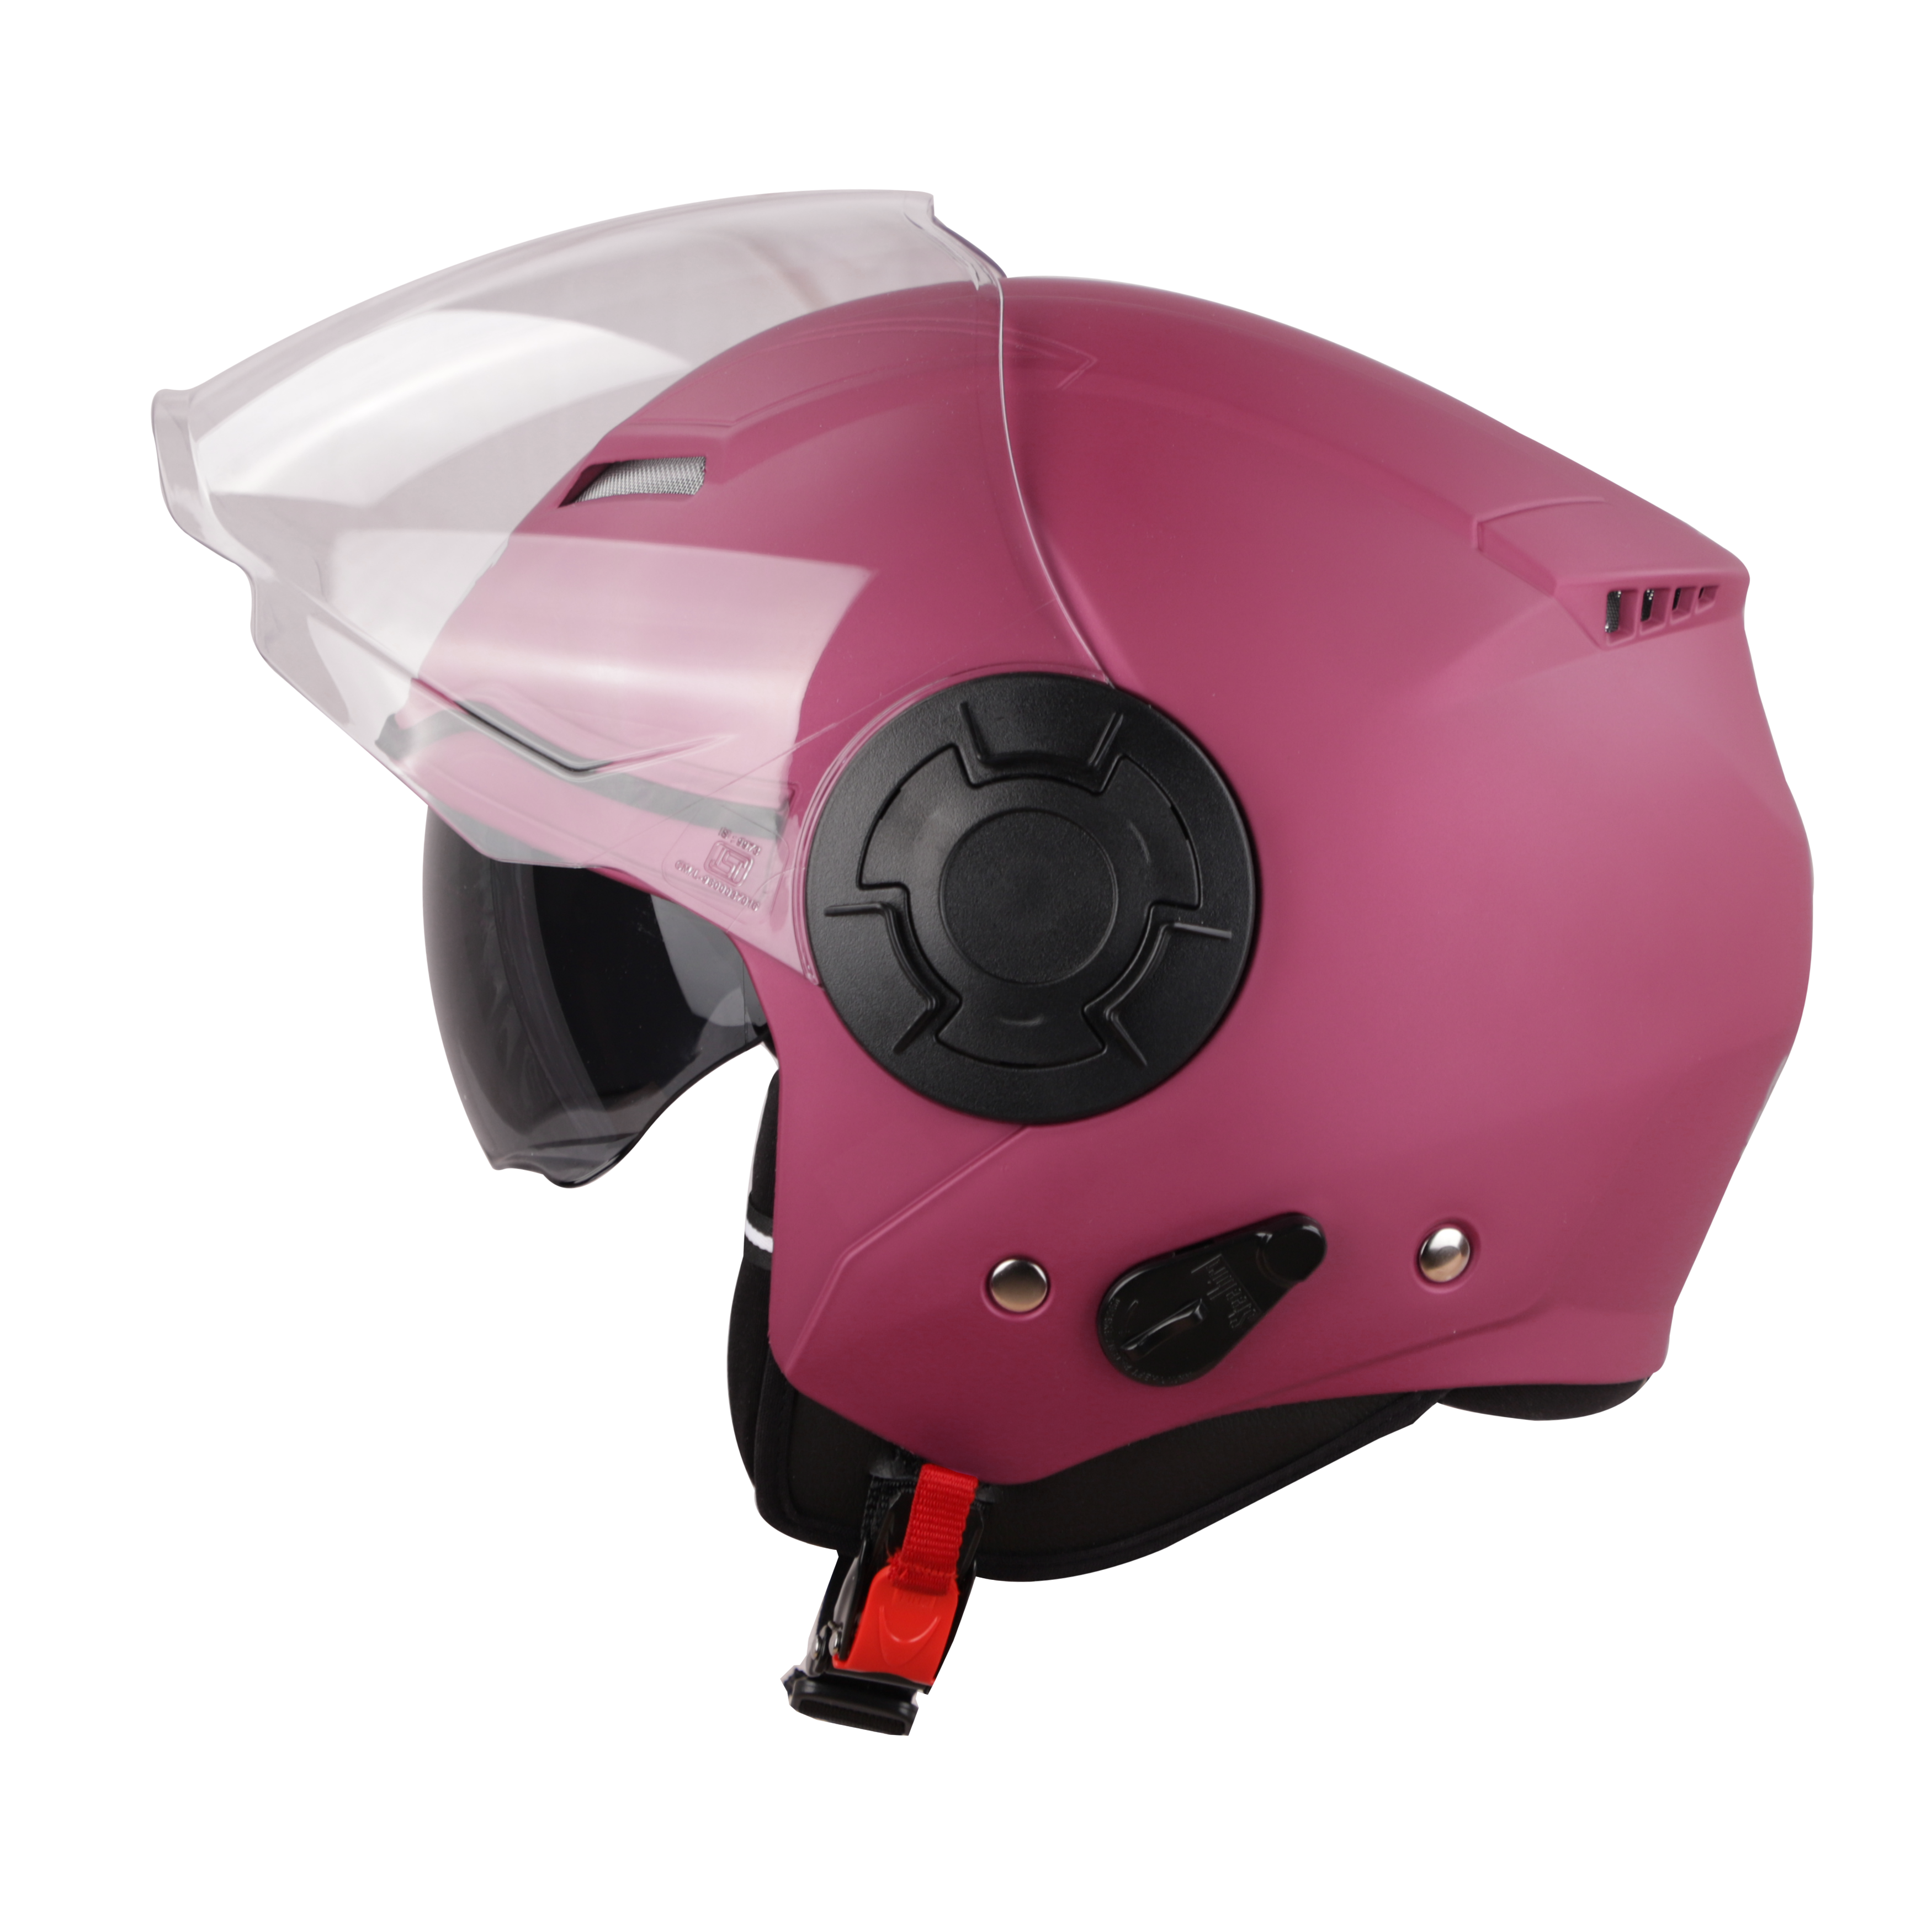 SBH-31 DRX GLOSSY PINK WITH INNER SUN SHIELD